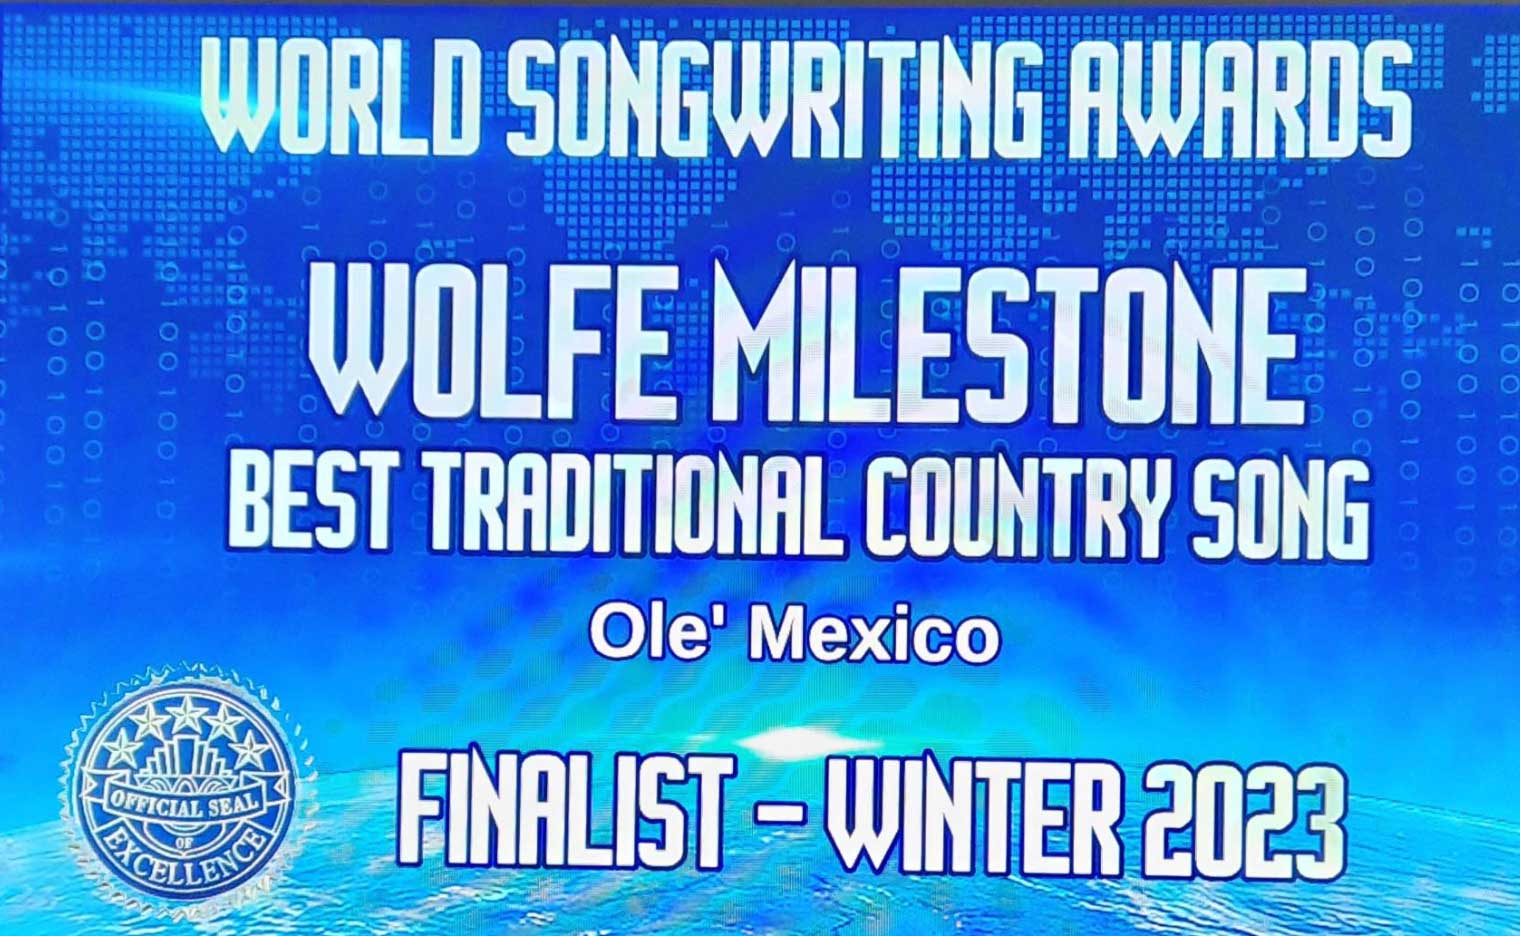 World Songwriting Awards - Wolfe Milestone - Best Traditional Country Song - Ole Mexico - Finalist Winter 2023